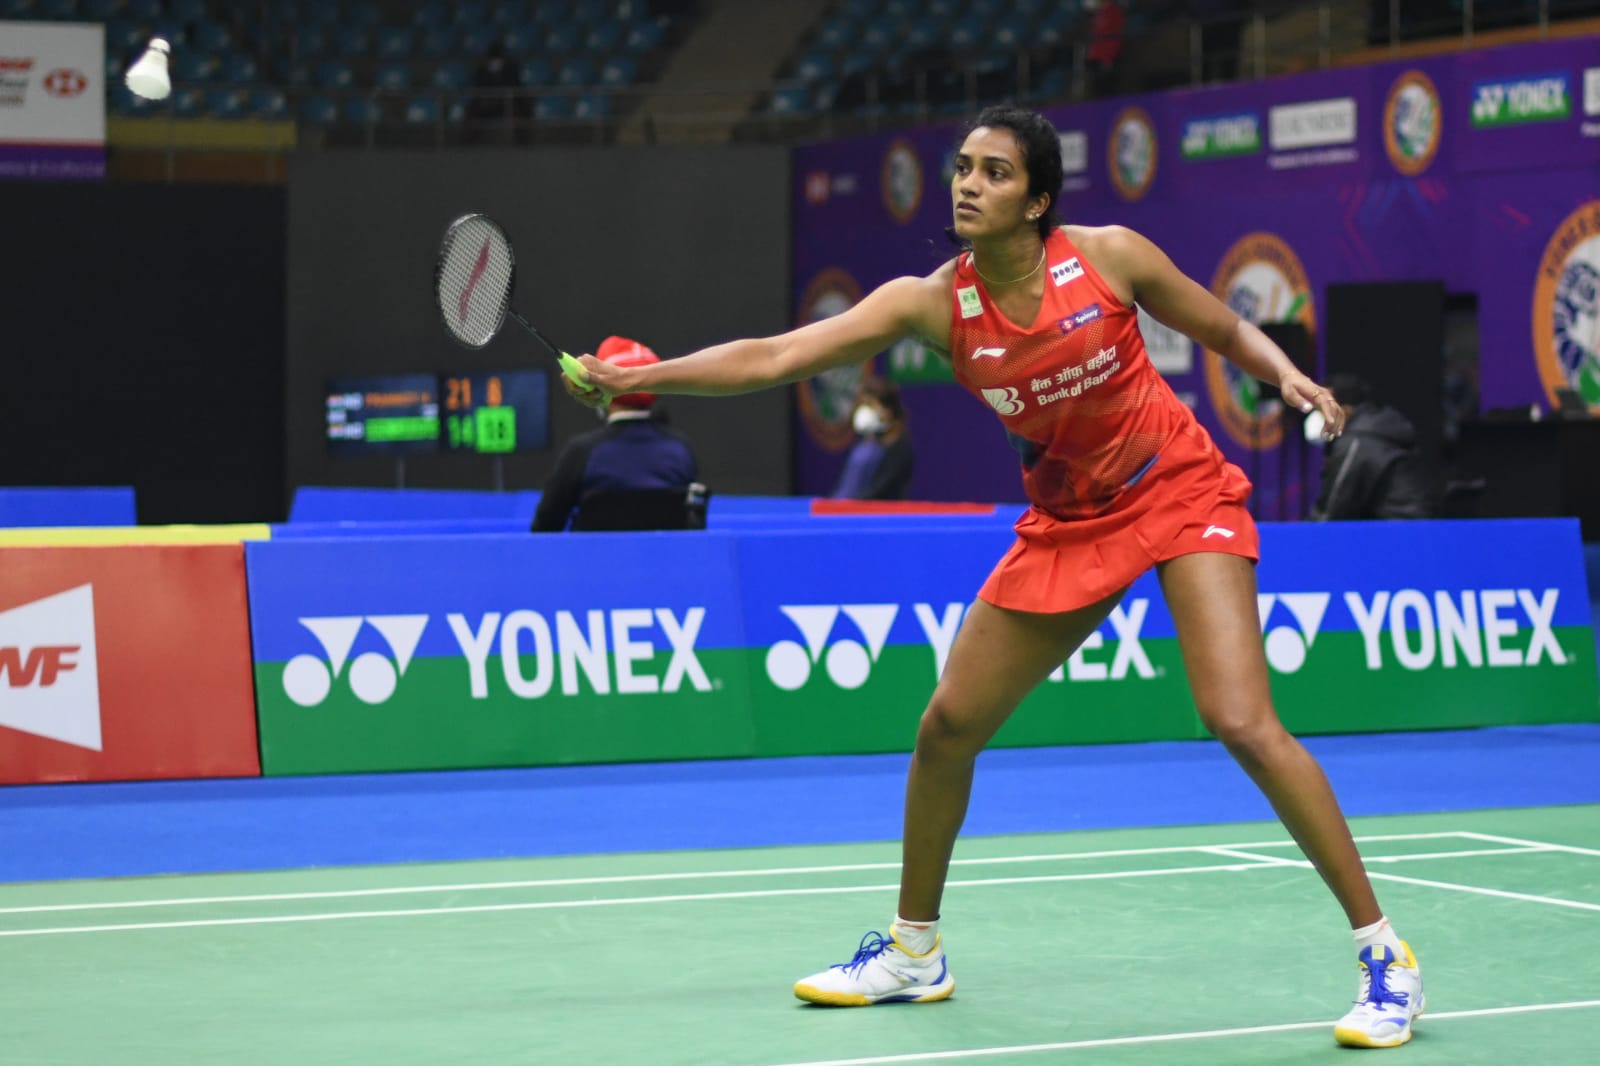 India Open 2022 PV Sindhu and Aakarshi Kashyap enter semis in womens singles